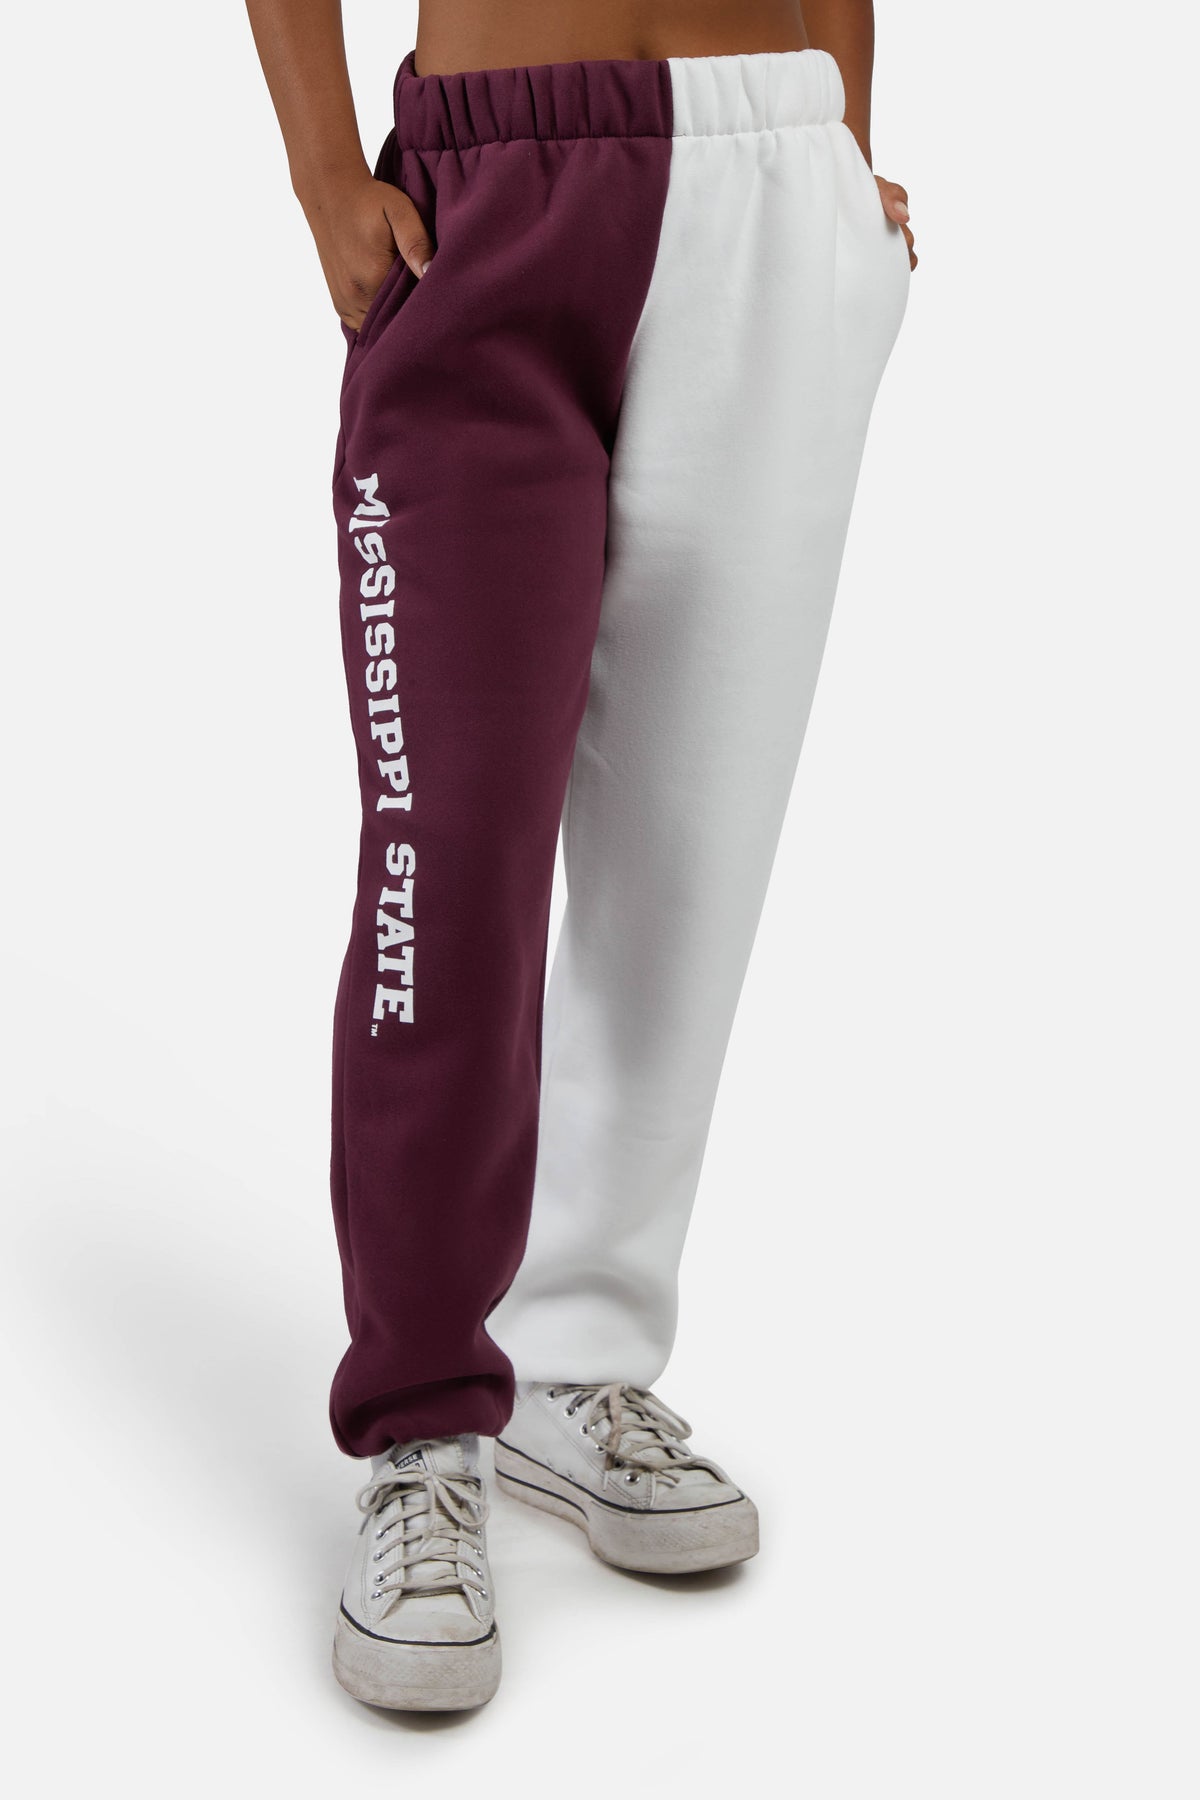 Mississippi State University Color-Block Sweats